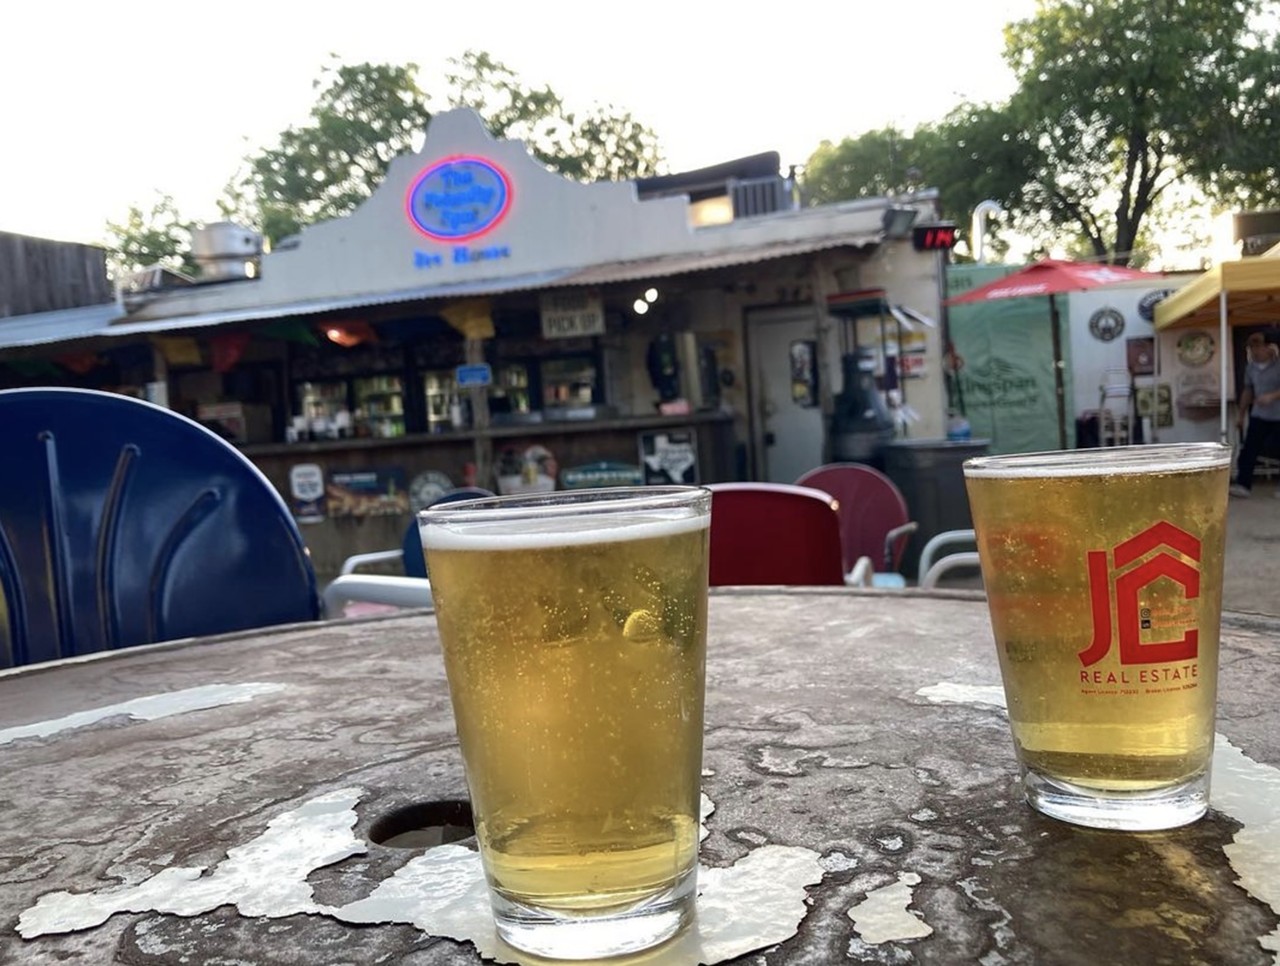 The Friendly Spot Ice House
943 S. Alamo St., (210) 224-2337, thefriendlyspot.com
Southtown’s largest outdoor food and drink venue, The Friendly Spot, offers a great outdoor sports viewing and a playground area for the rugrats. 
Photo via Instagram / fondlycooper